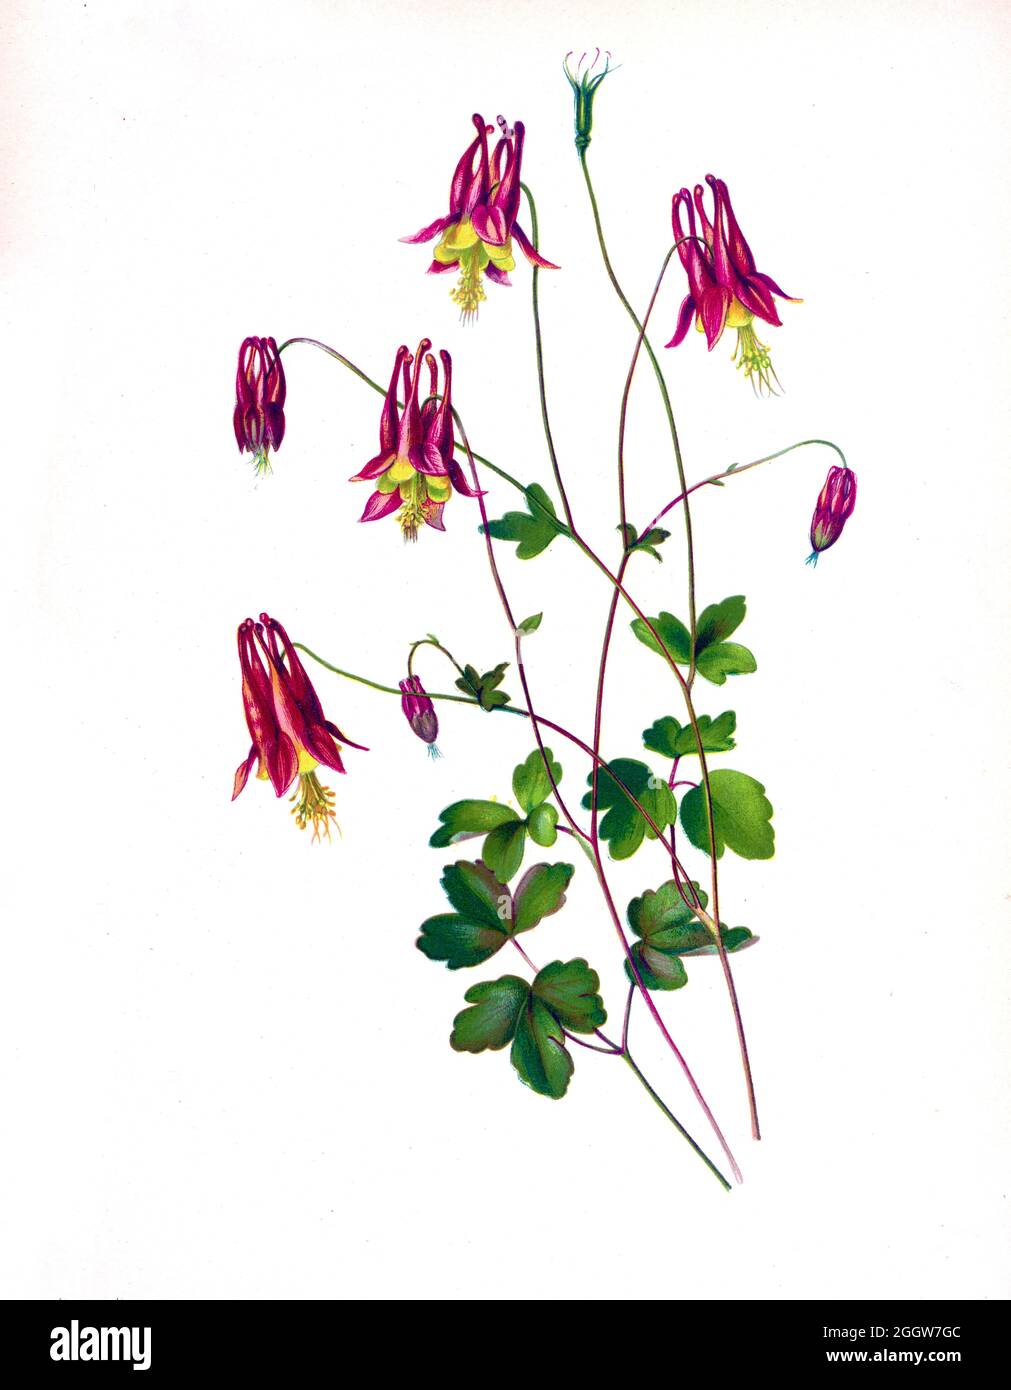 The Wild Columbine. (Aquilegia canadensis), the Canadian or Canada columbine, eastern red columbine, or wild columbine, is a species of flowering plant in the buttercup family Ranunculaceae. It is an herbaceous perennial native to woodland and rocky slopes in eastern North America, prized for its red and yellow flowers. It readily hybridizes with other species in the genus Aquilegia.   from the book Beautiful wild flowers of America : from original water-color drawings after nature by  Isaac Sprague, 1811-1895 Published by Troy, Nims and Knights in New York in 1884 With Descriptive text by Rev Stock Photo